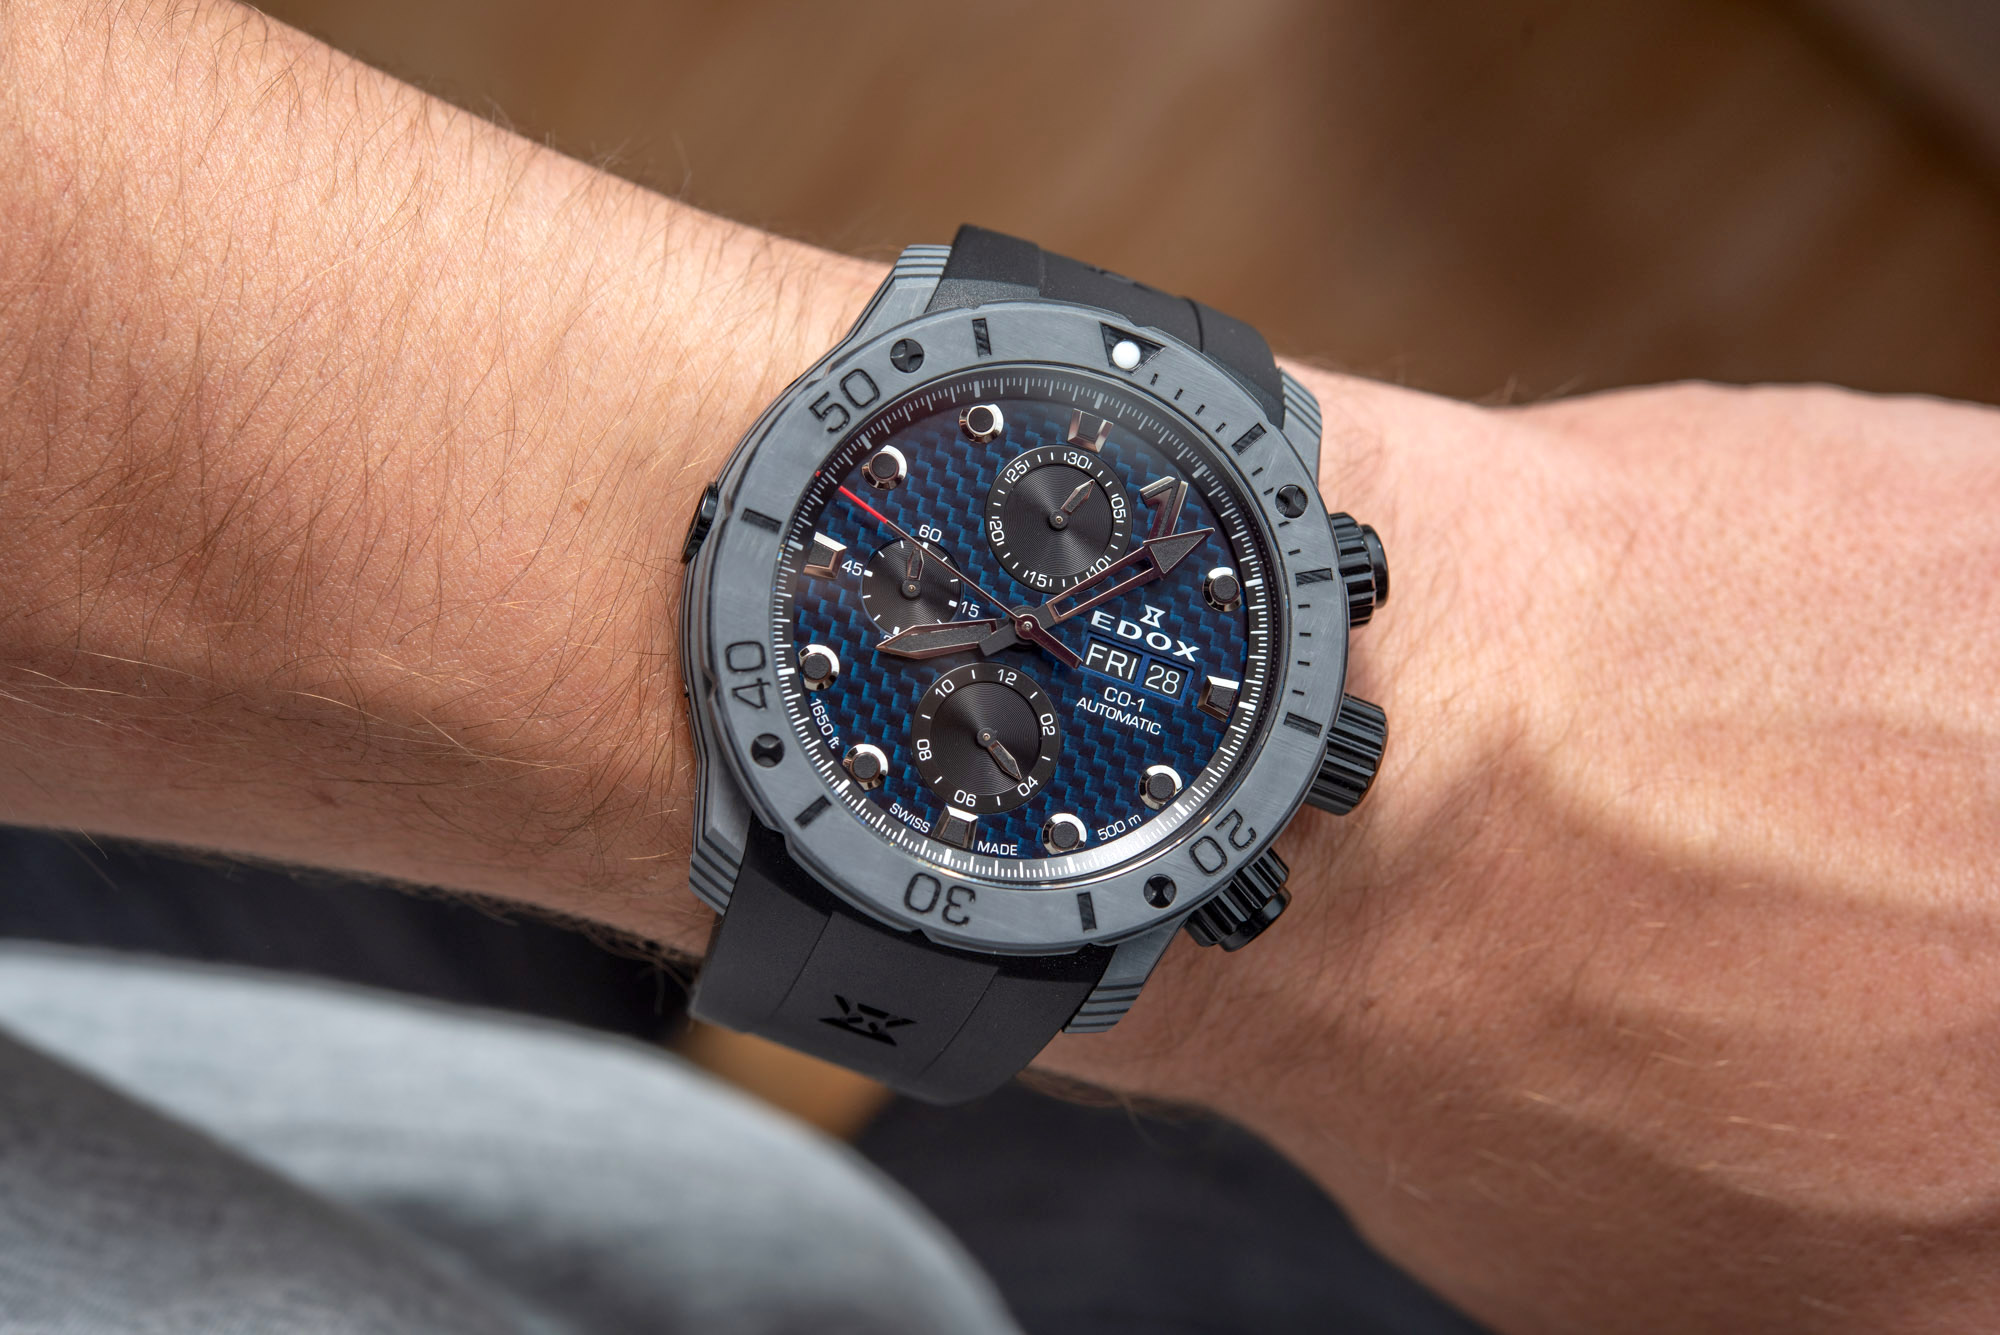 Watch Review: Edox CO-1 Carbon Chronograph | aBlogtoWatch